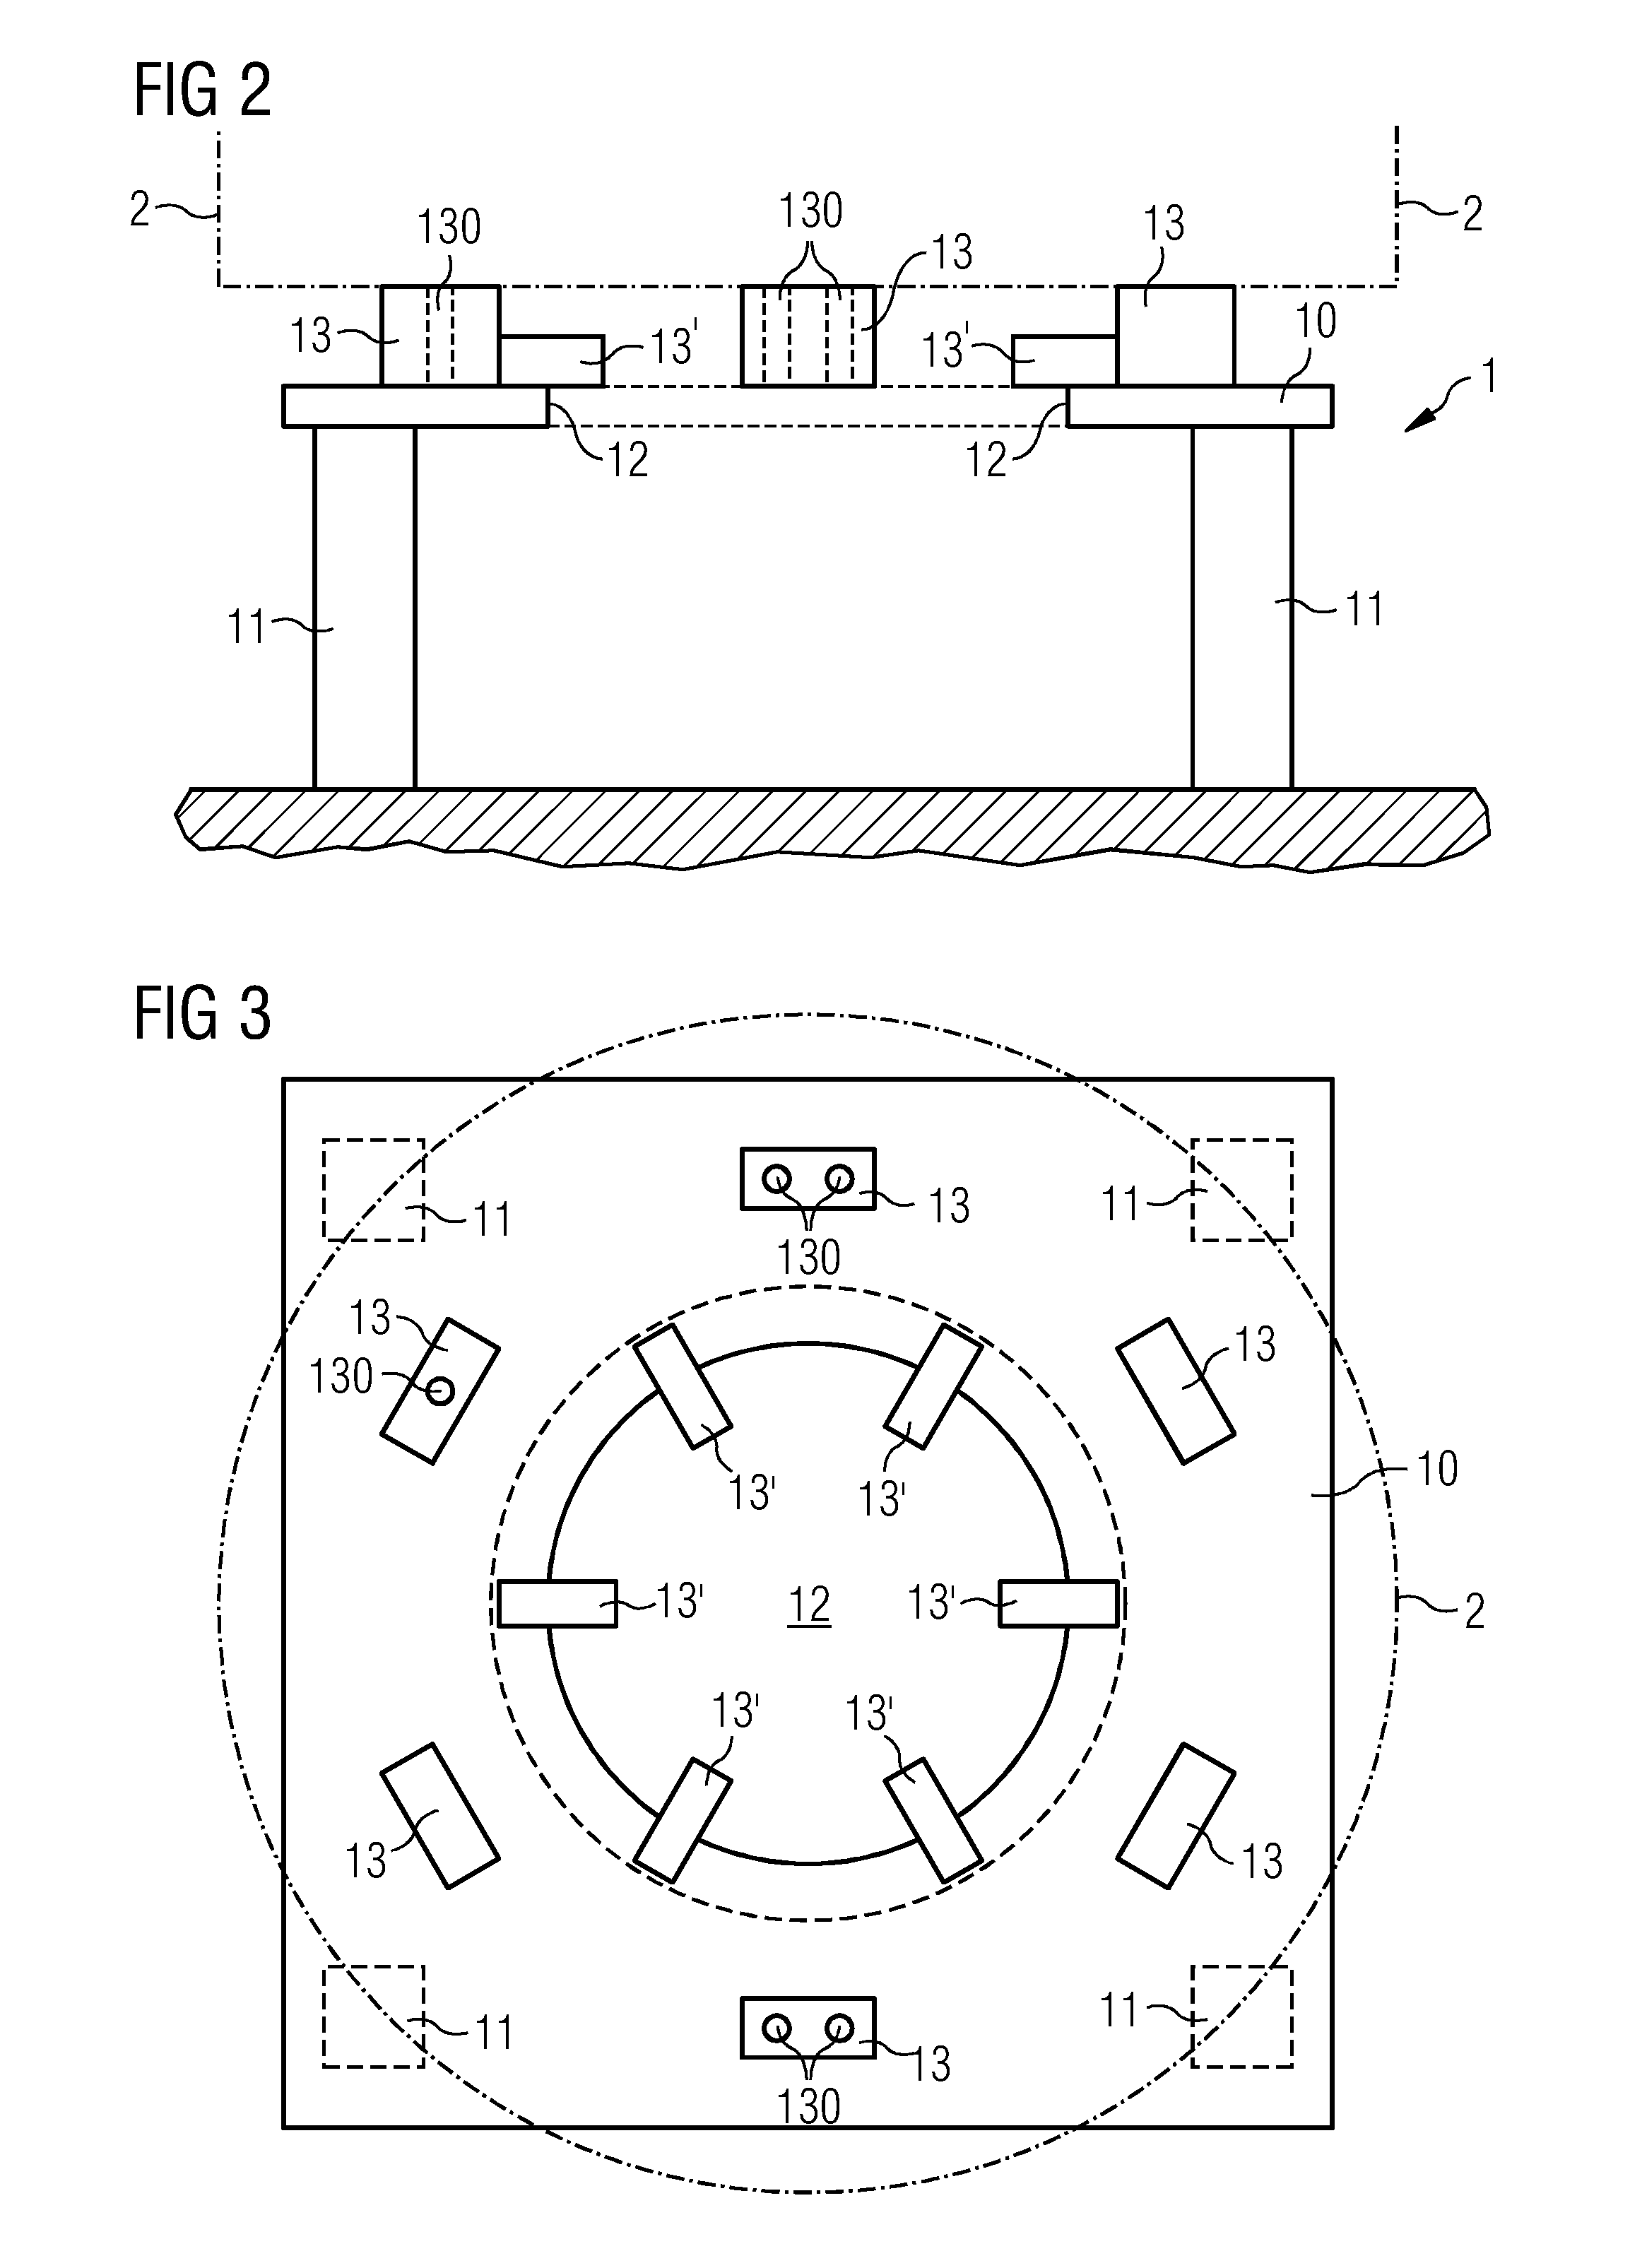 Method of vertically assembling a generator of a wind turbine